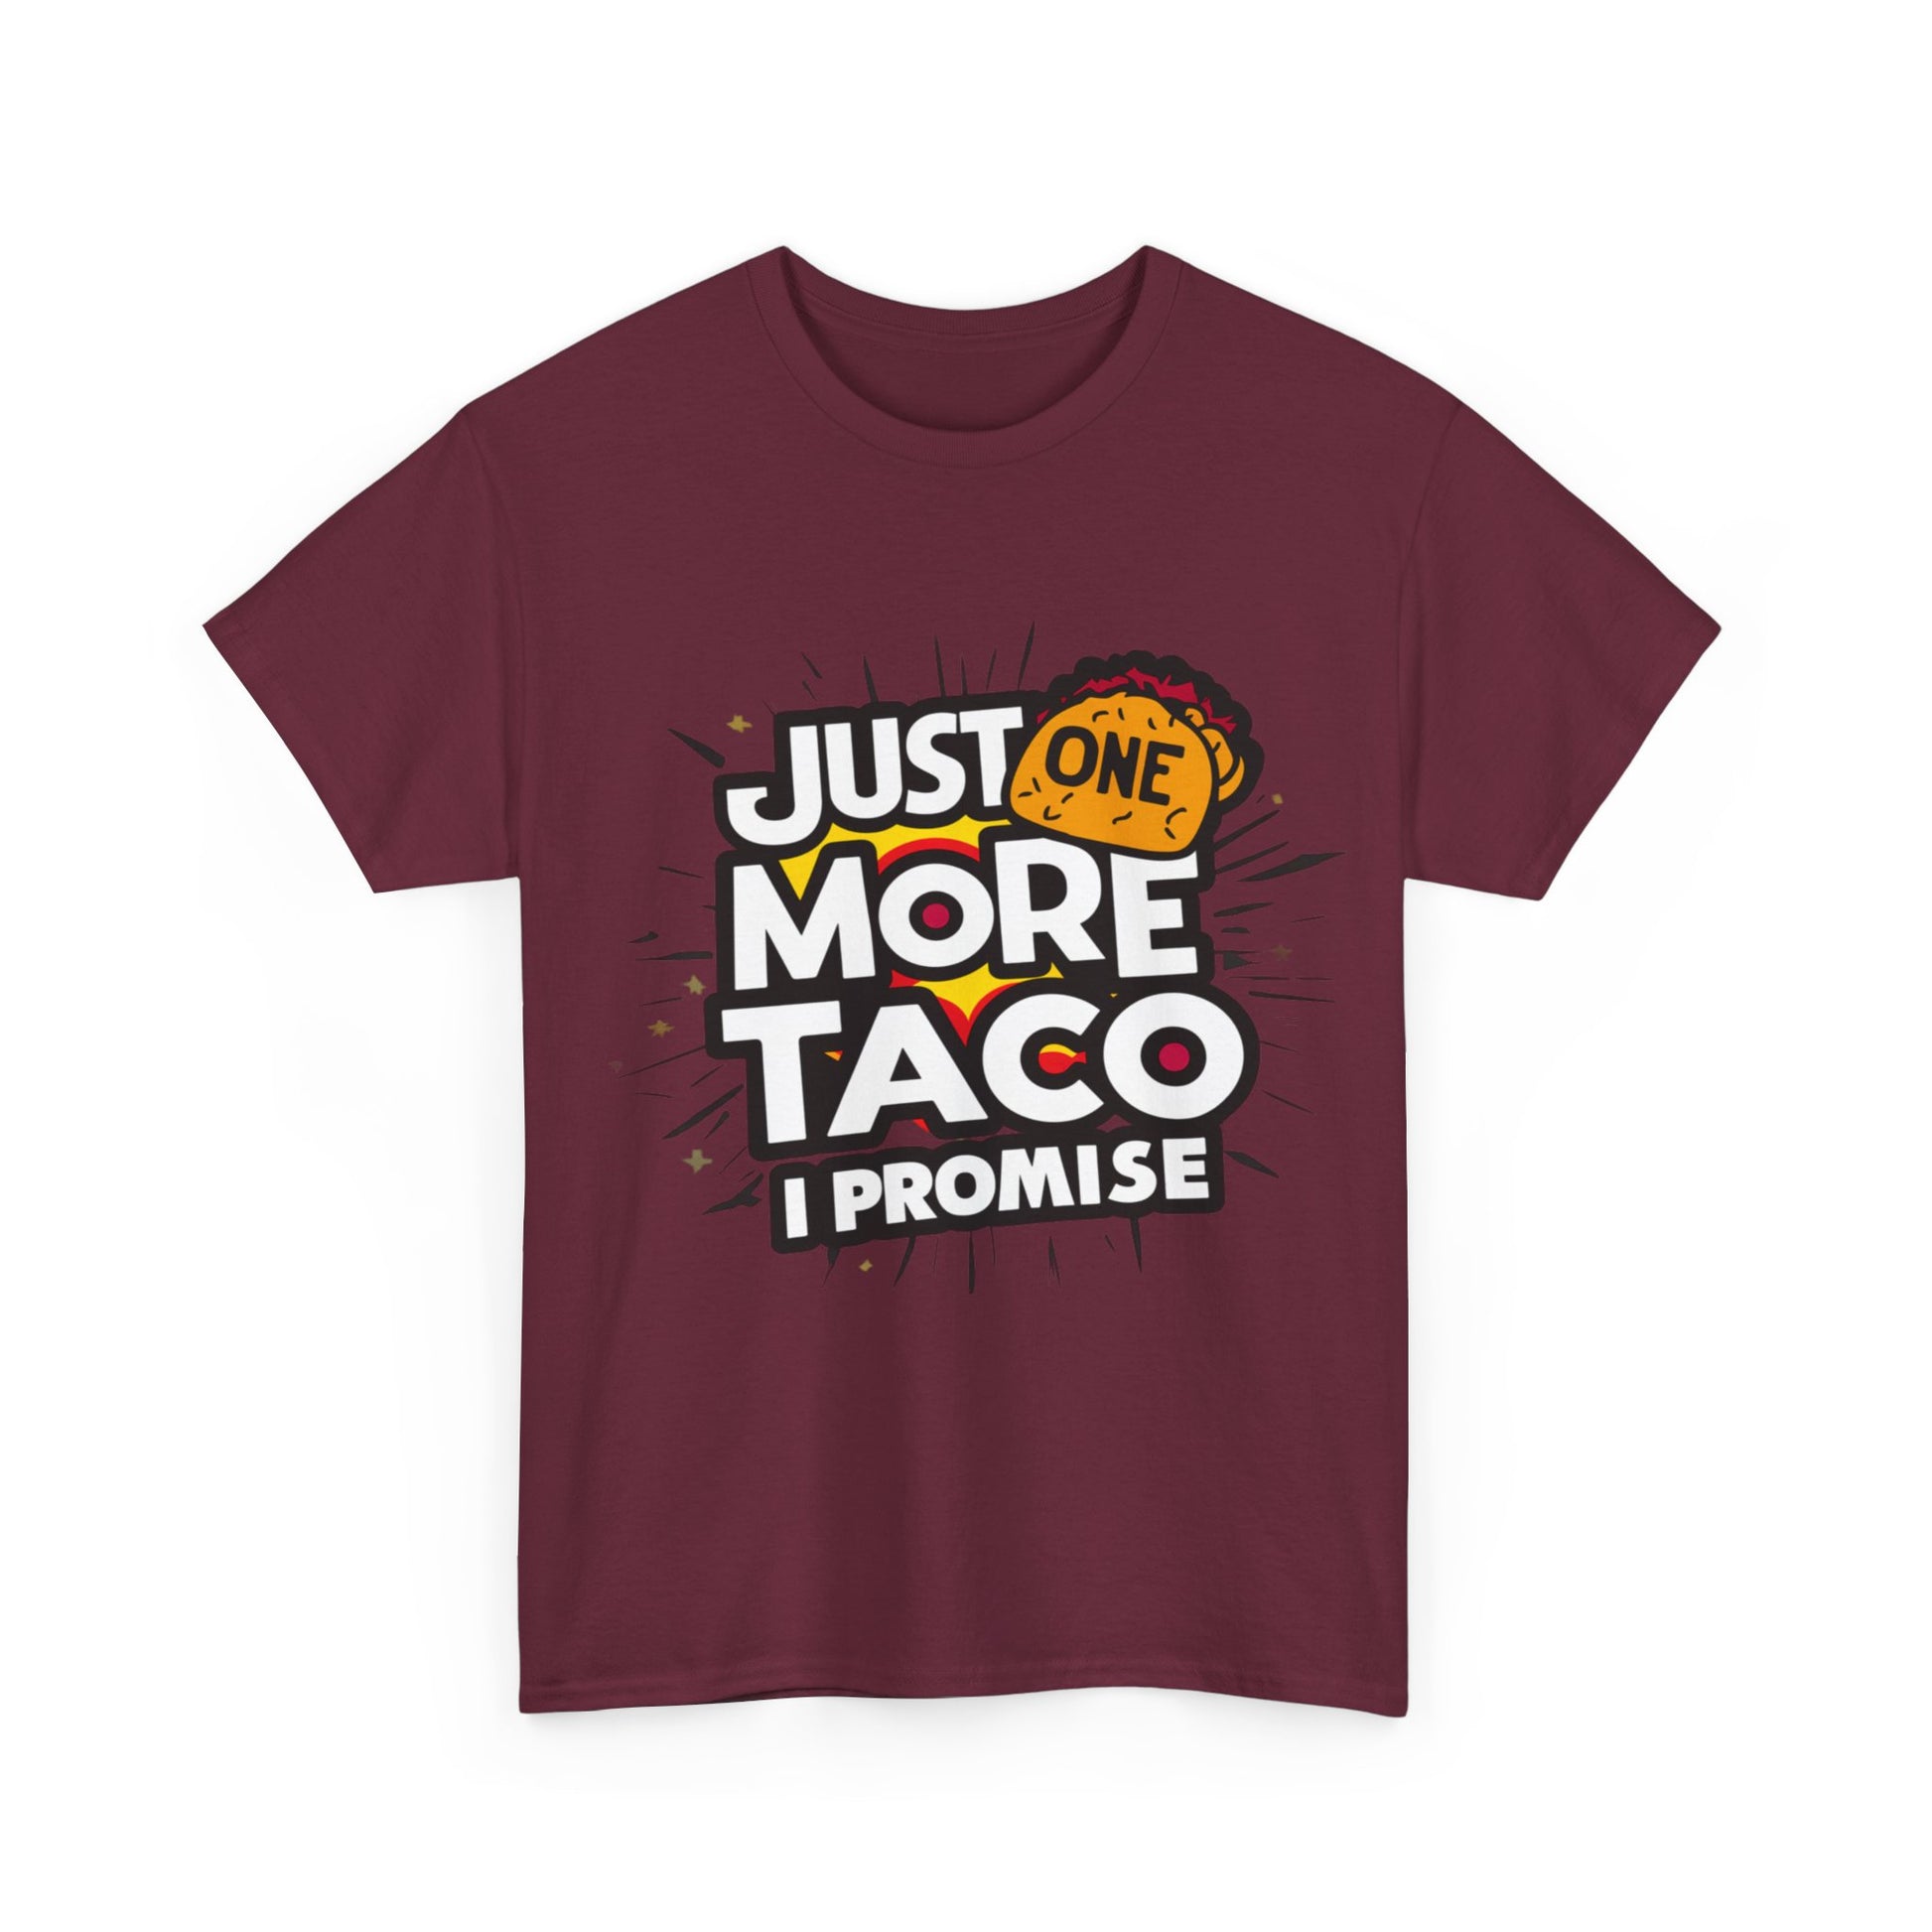 Copy of Just One More Taco I Promise Mexican Food Graphic Unisex Heavy Cotton Tee Cotton Funny Humorous Graphic Soft Premium Unisex Men Women Maroon T-shirt Birthday Gift-27